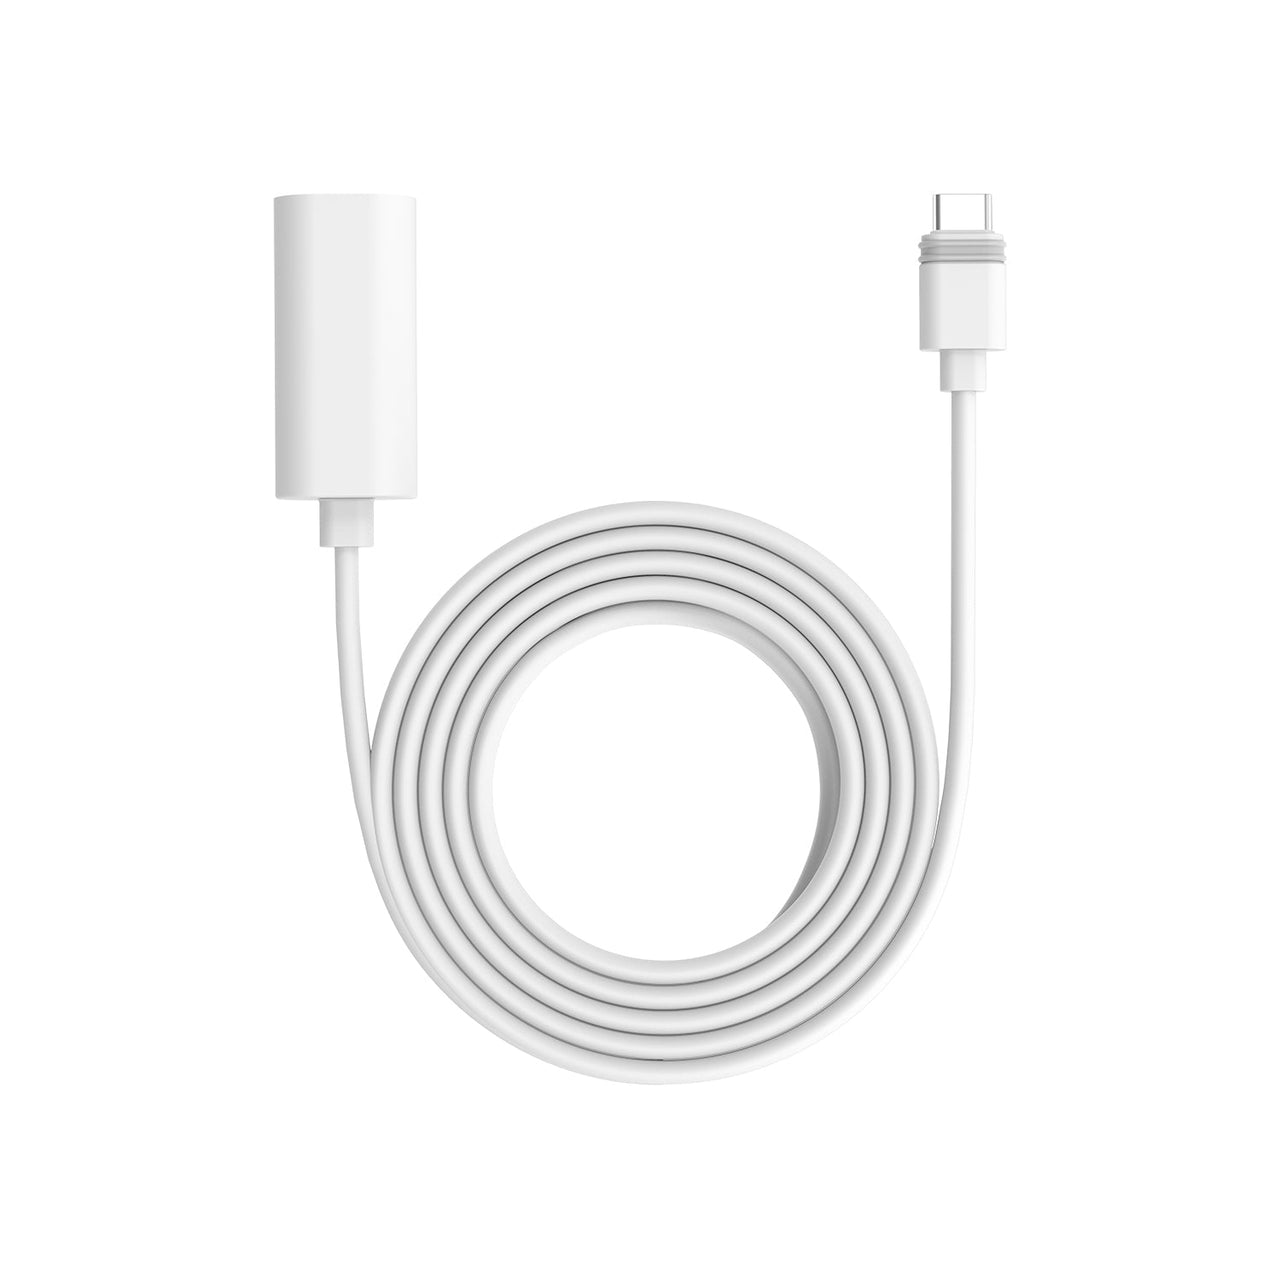 products/ring_10ft_USBC_extension_cable_wht_1500x1500_1_ca9ba149-c207-45a9-a52f-8a2c323aa1e5.jpg